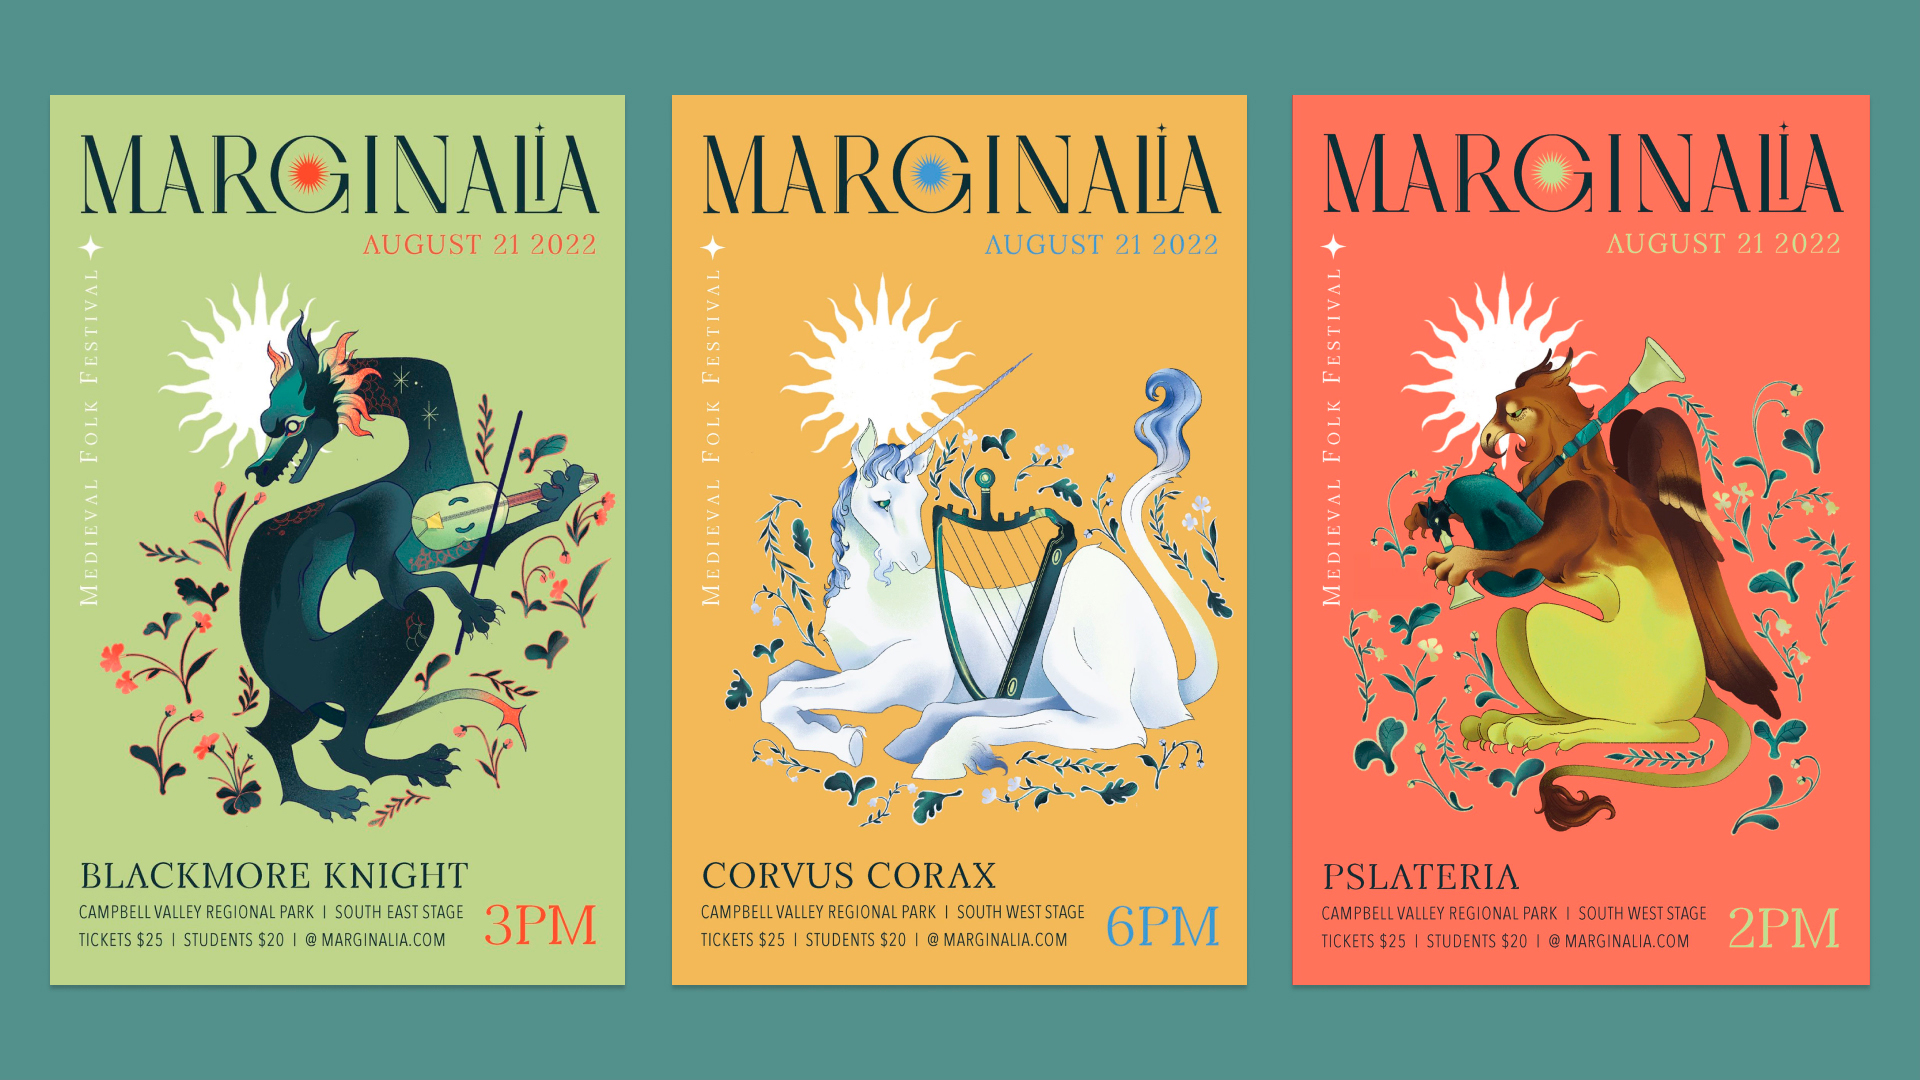 An image showing 3 posters for Marginalia: A Medieval Folk Music Festival. All the posters feature a classical illustration of a mythical creature against a white sun and surrounded by flowers. The first poster has a light green background and features a turquoise dragon playing a light green violin while surrounded by small red flowers and dark green plants. The second poster has a warm yellow background and features a white unicorn laying down with a harp at its flank. It is surrounded by blue flowers and dark red plants. The third poster features a brown and light green griffin on a red background. The griffin is playing a set of turquoise bagpipes decorated with animal heads.